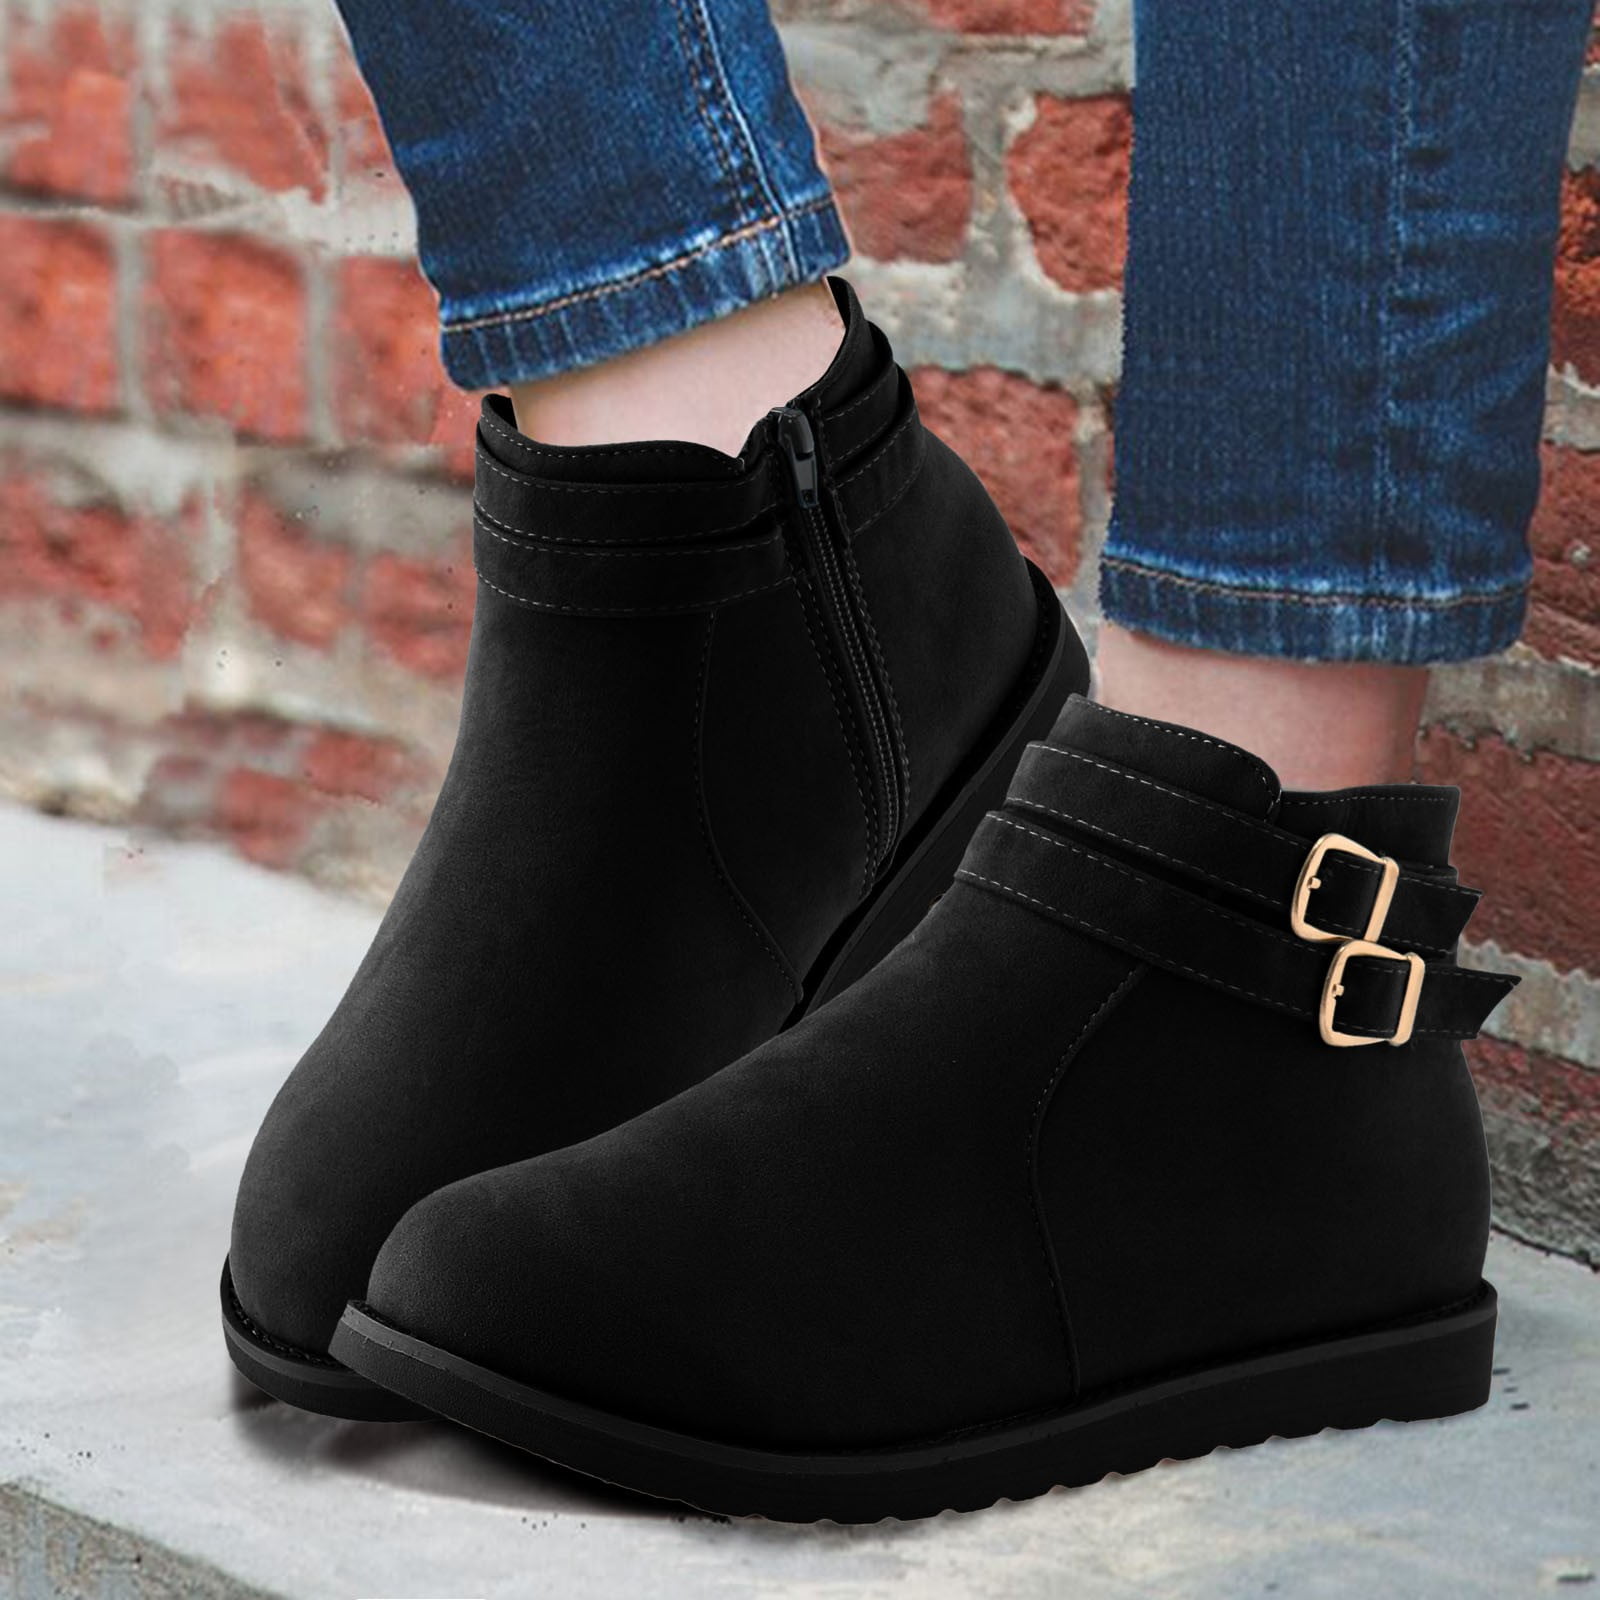 Boots Worth Investing In, From Chelsea to Ankle Boots | theSkimm